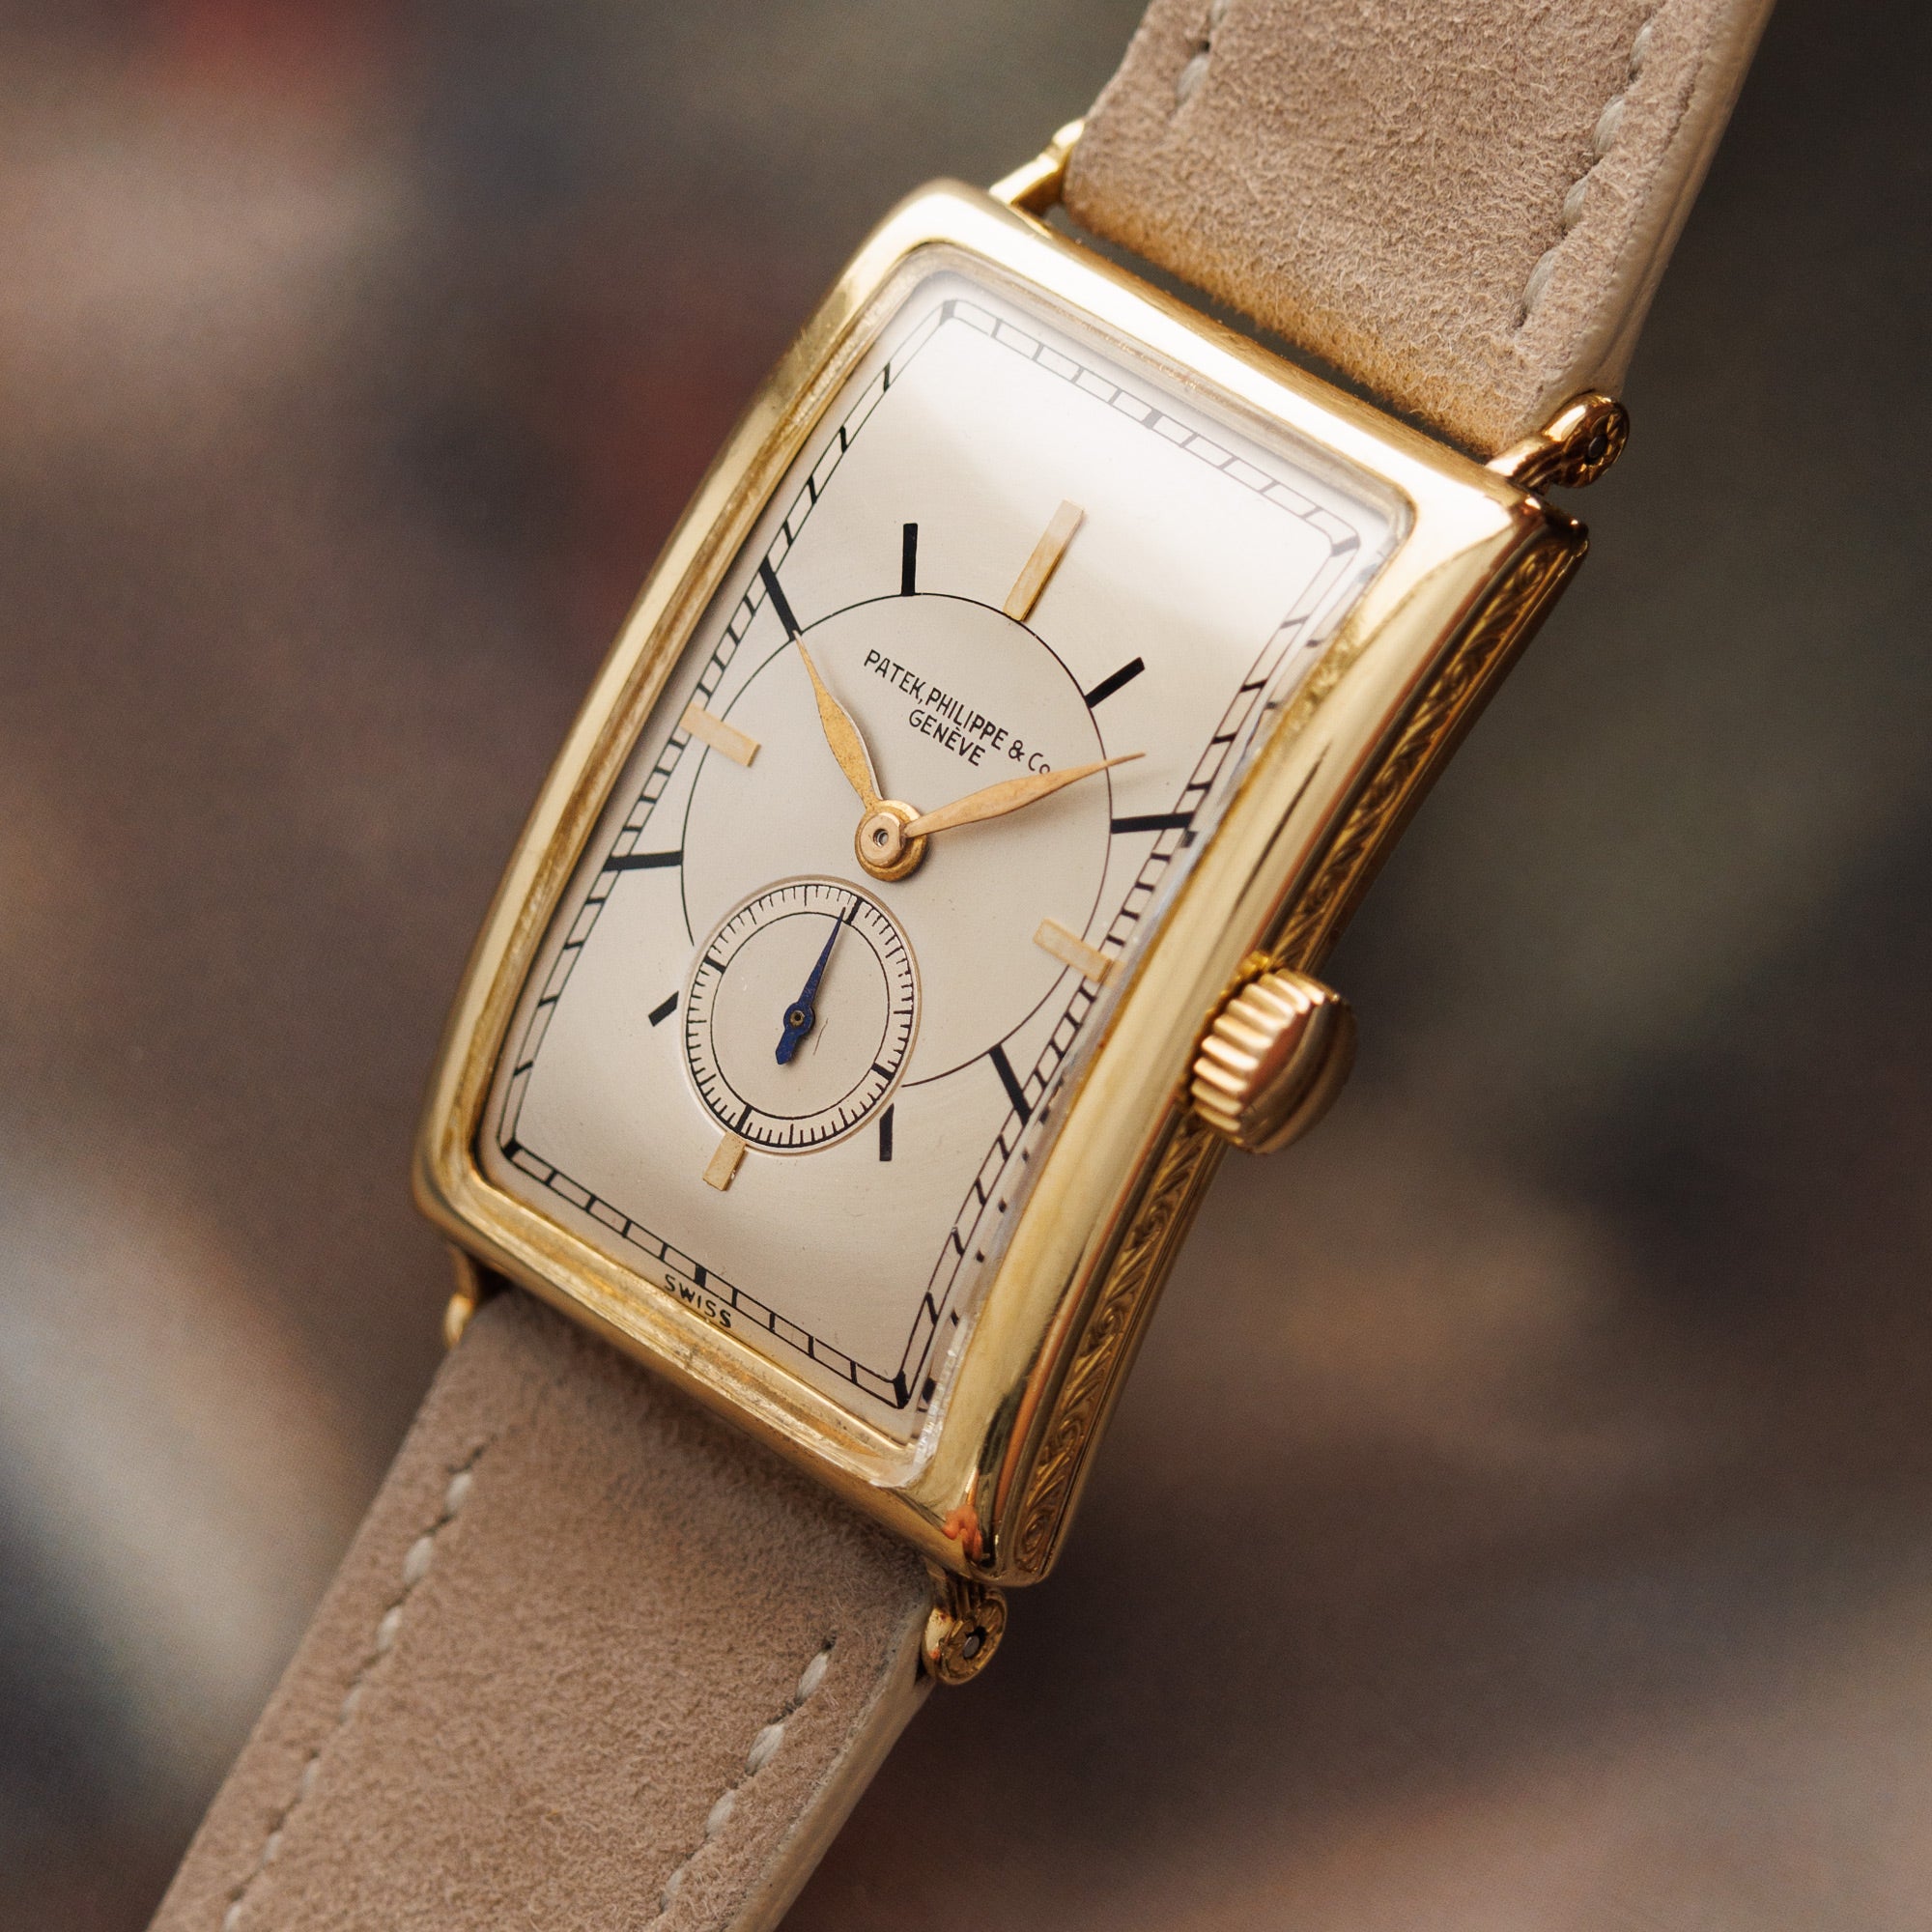 Patek Philippe - Patek Philippe Yellow Gold Rectangular Watch Ref. 10 with Remarkable Engraving Details - The Keystone Watches